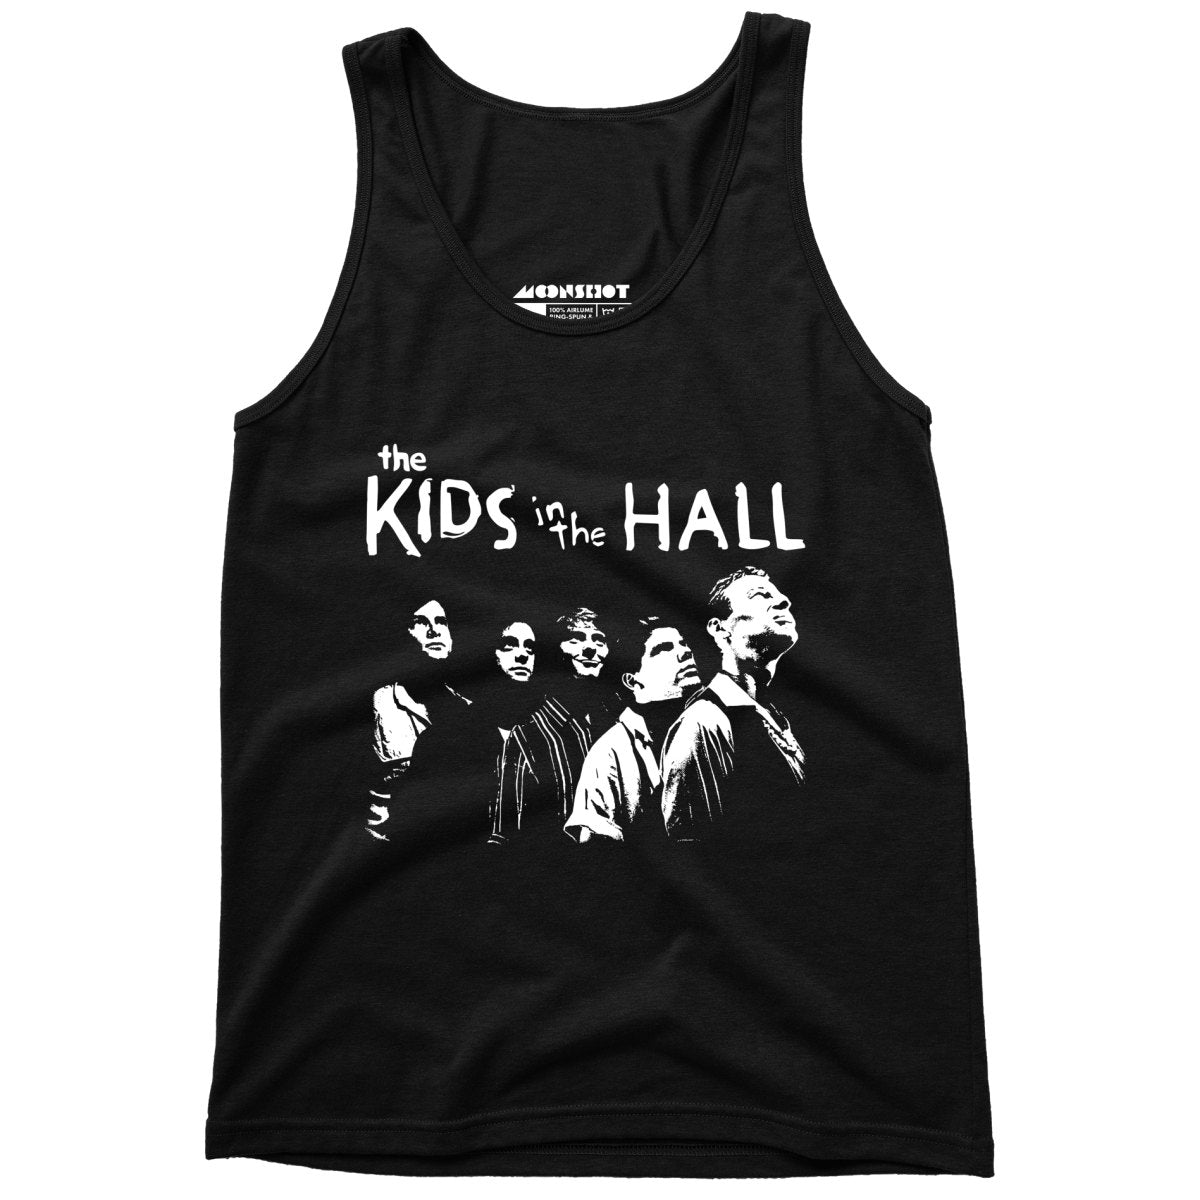 The Kids in The Hall - Unisex Tank Top